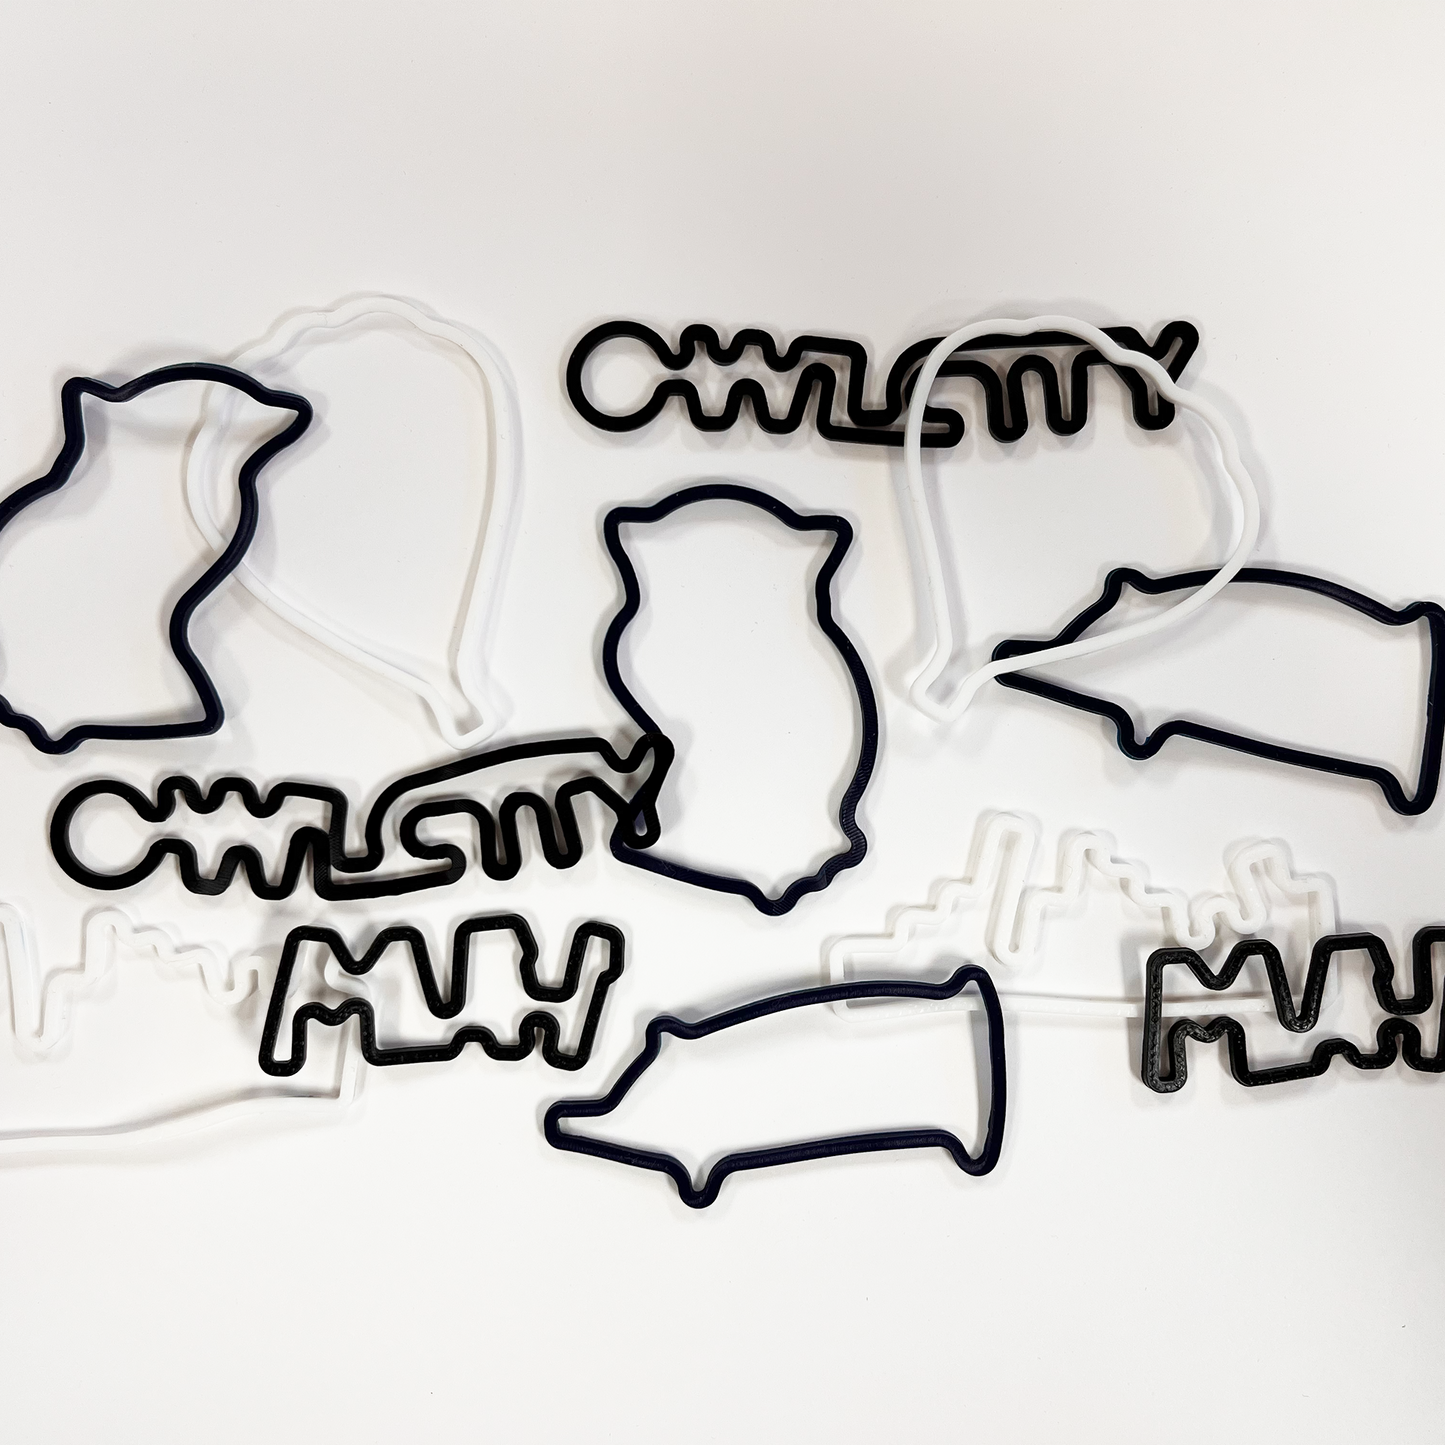 Owl City Silly Bands